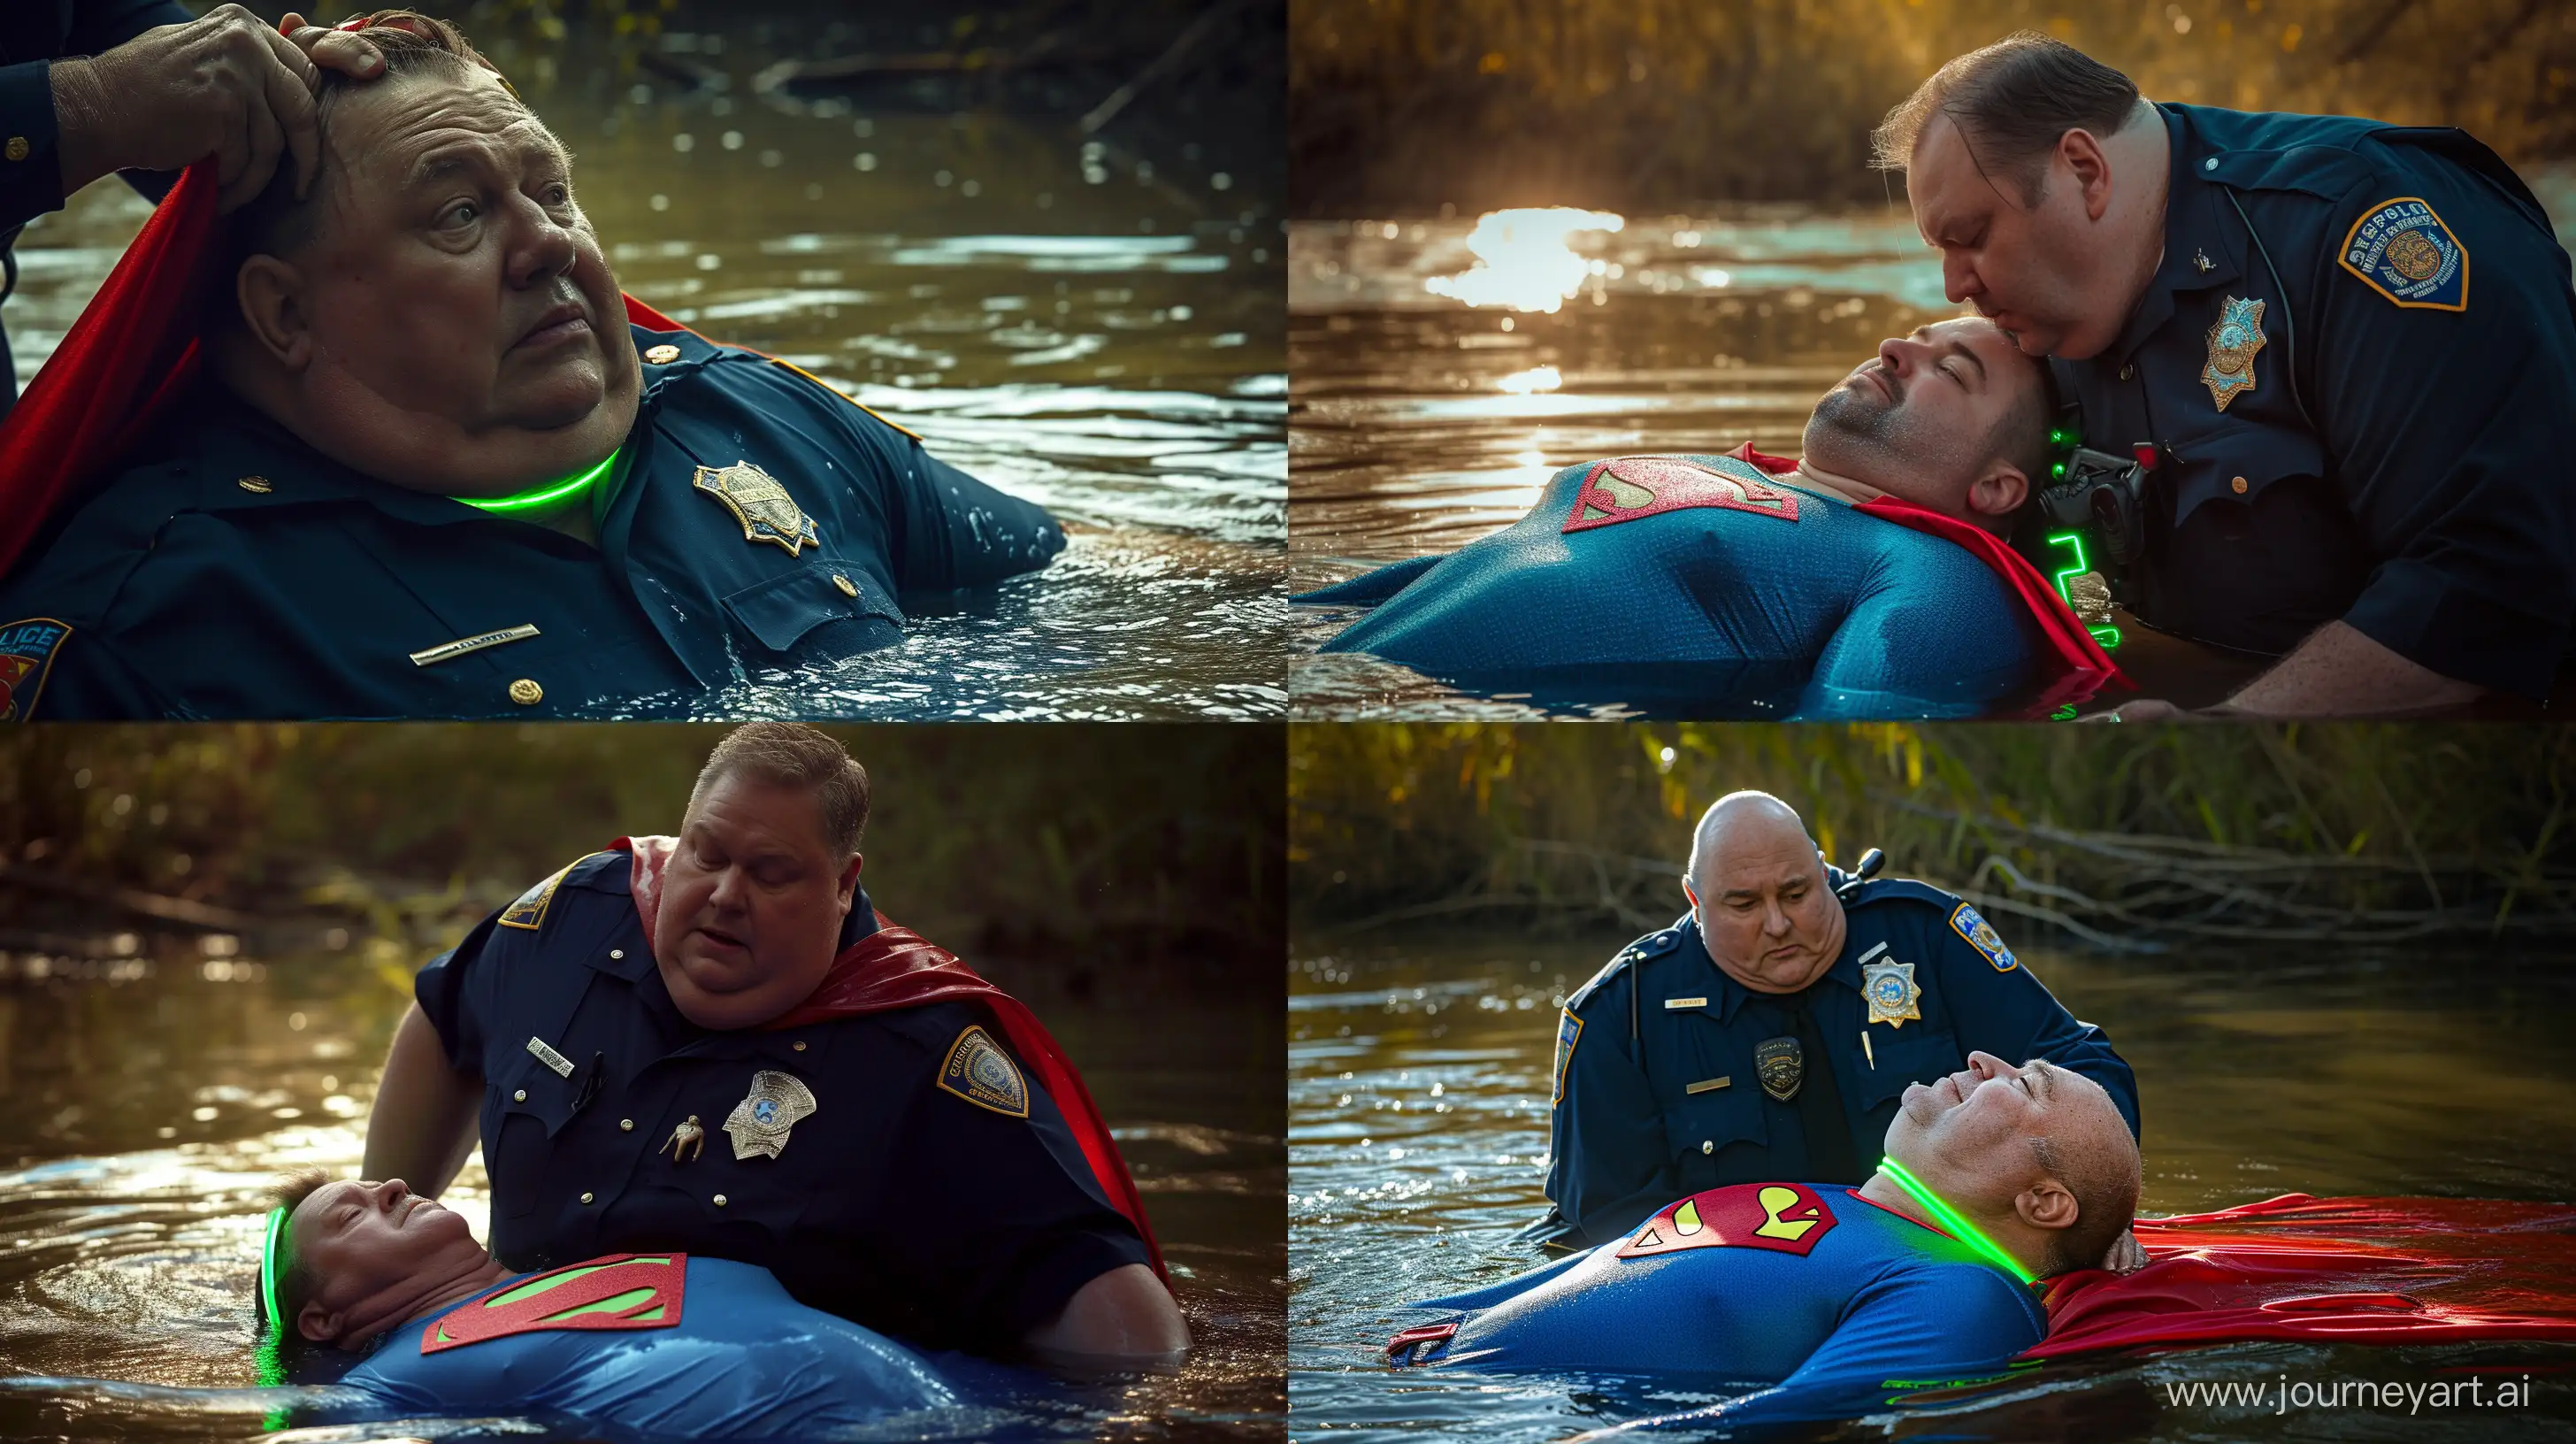 Senior-Police-Officer-Pulls-Submerged-1978-Superman-from-River